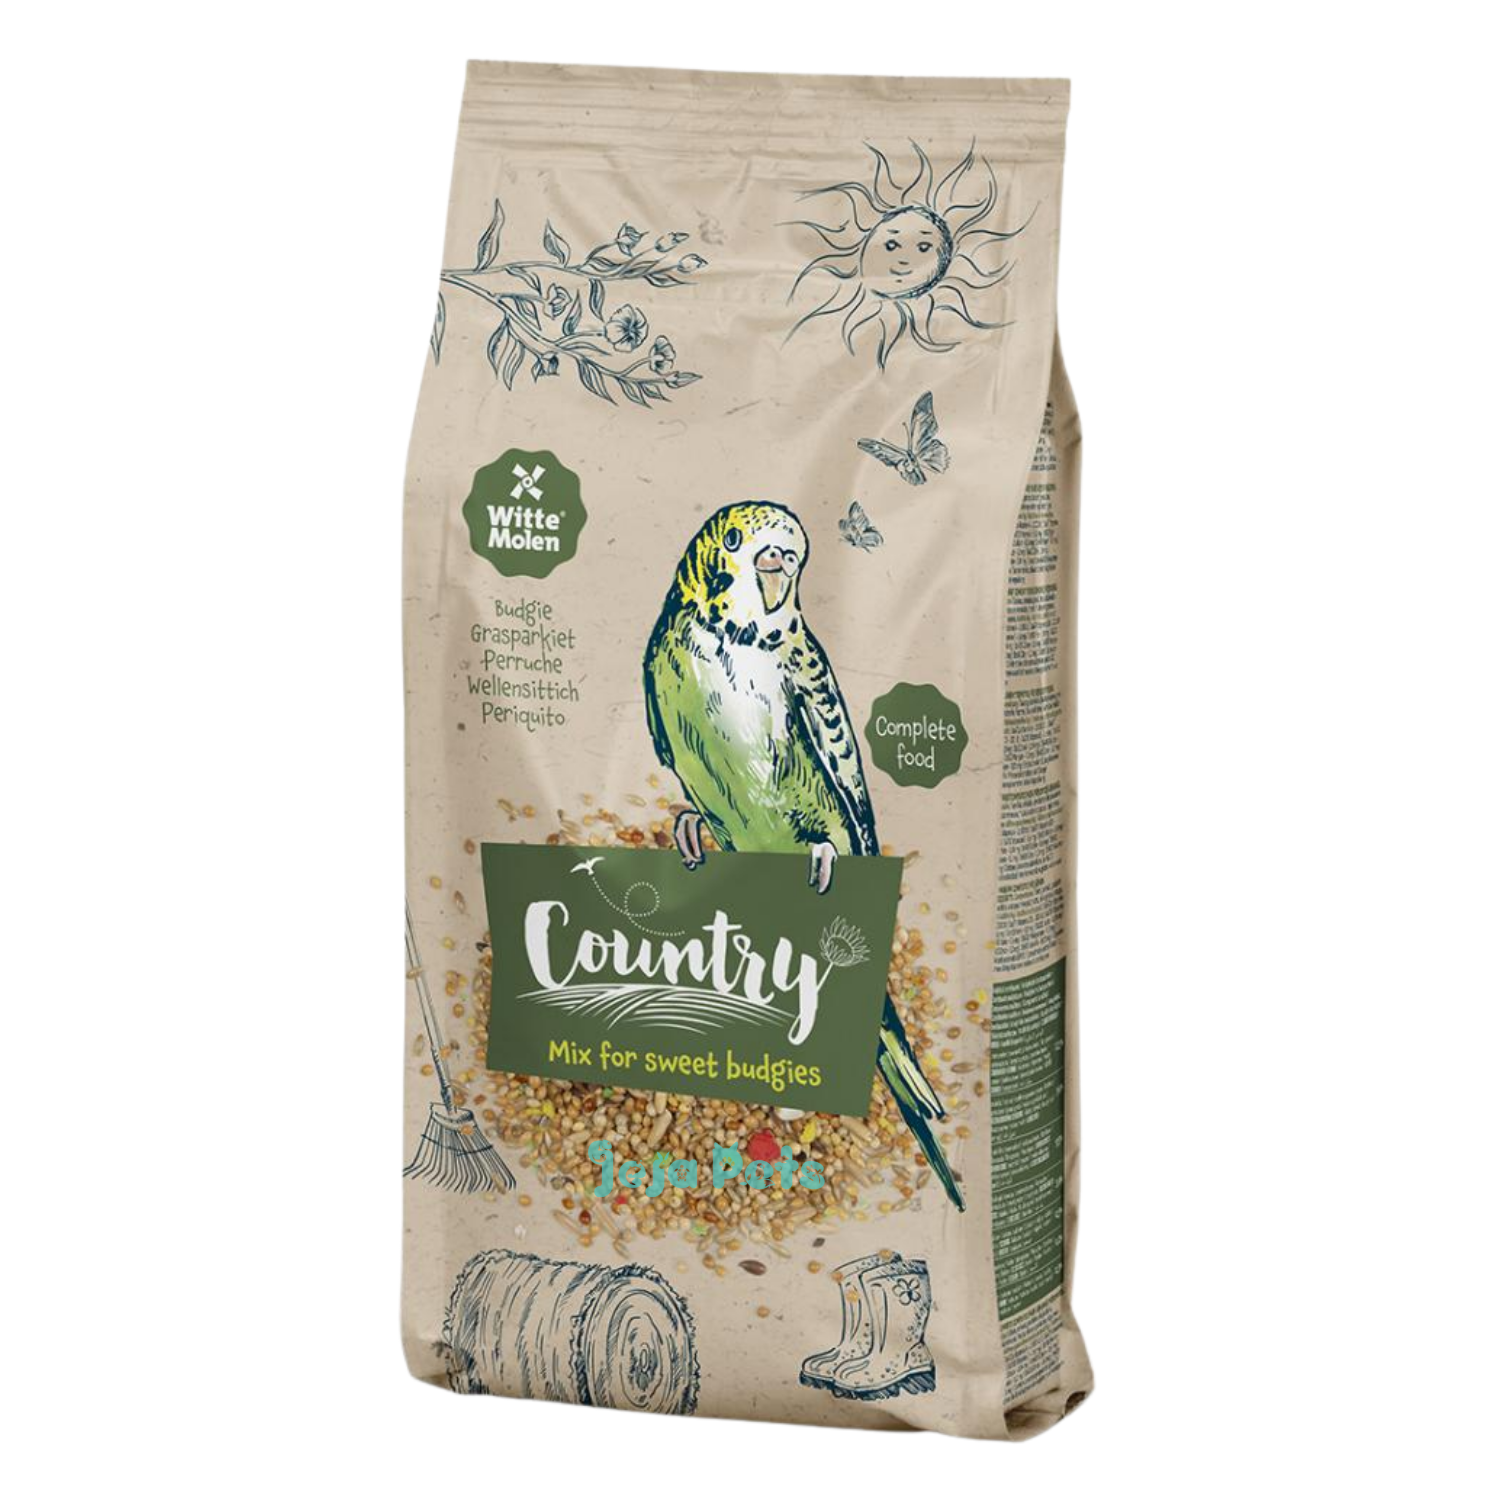 Witte Molen Country Budgie - 600g / 2.5kg